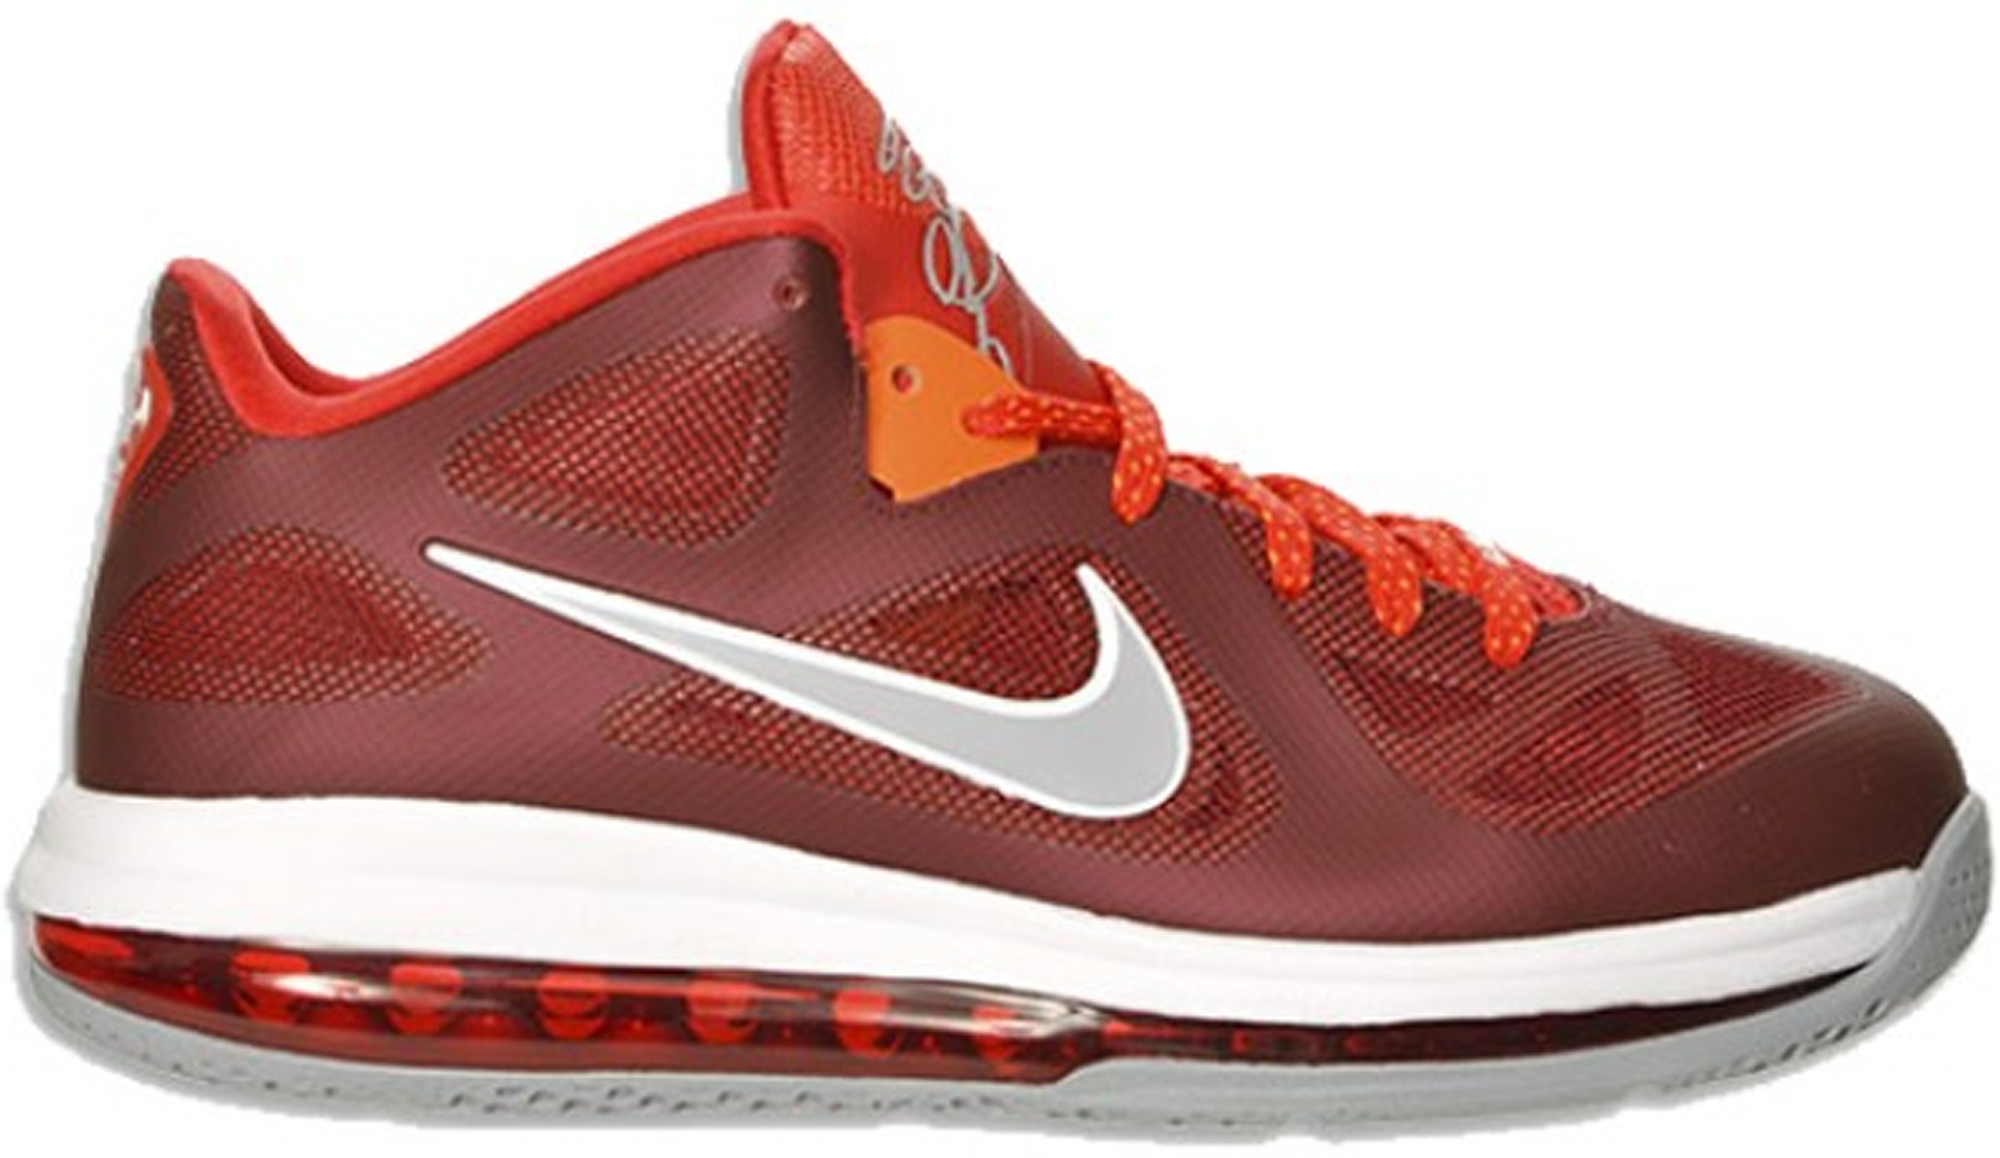 lebron 9 lows for sale